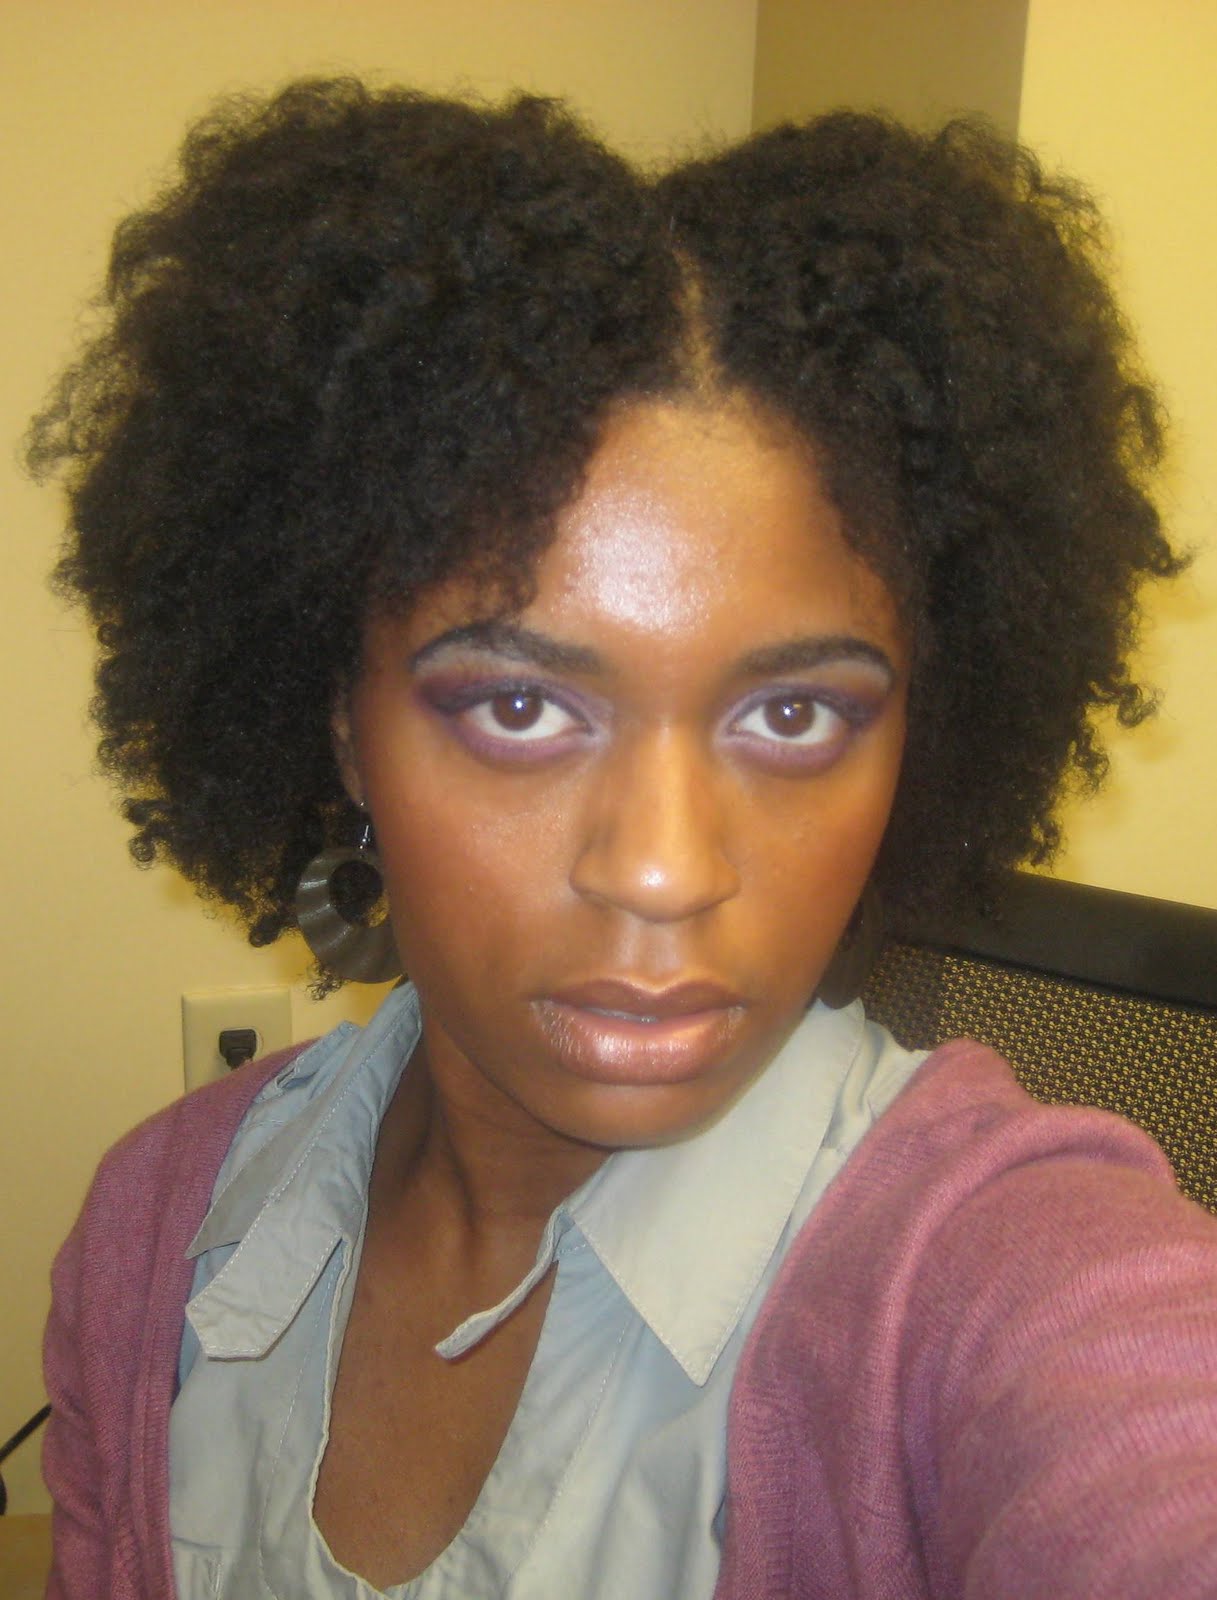 Naturally Elegant: Braid Out Results After the Rain